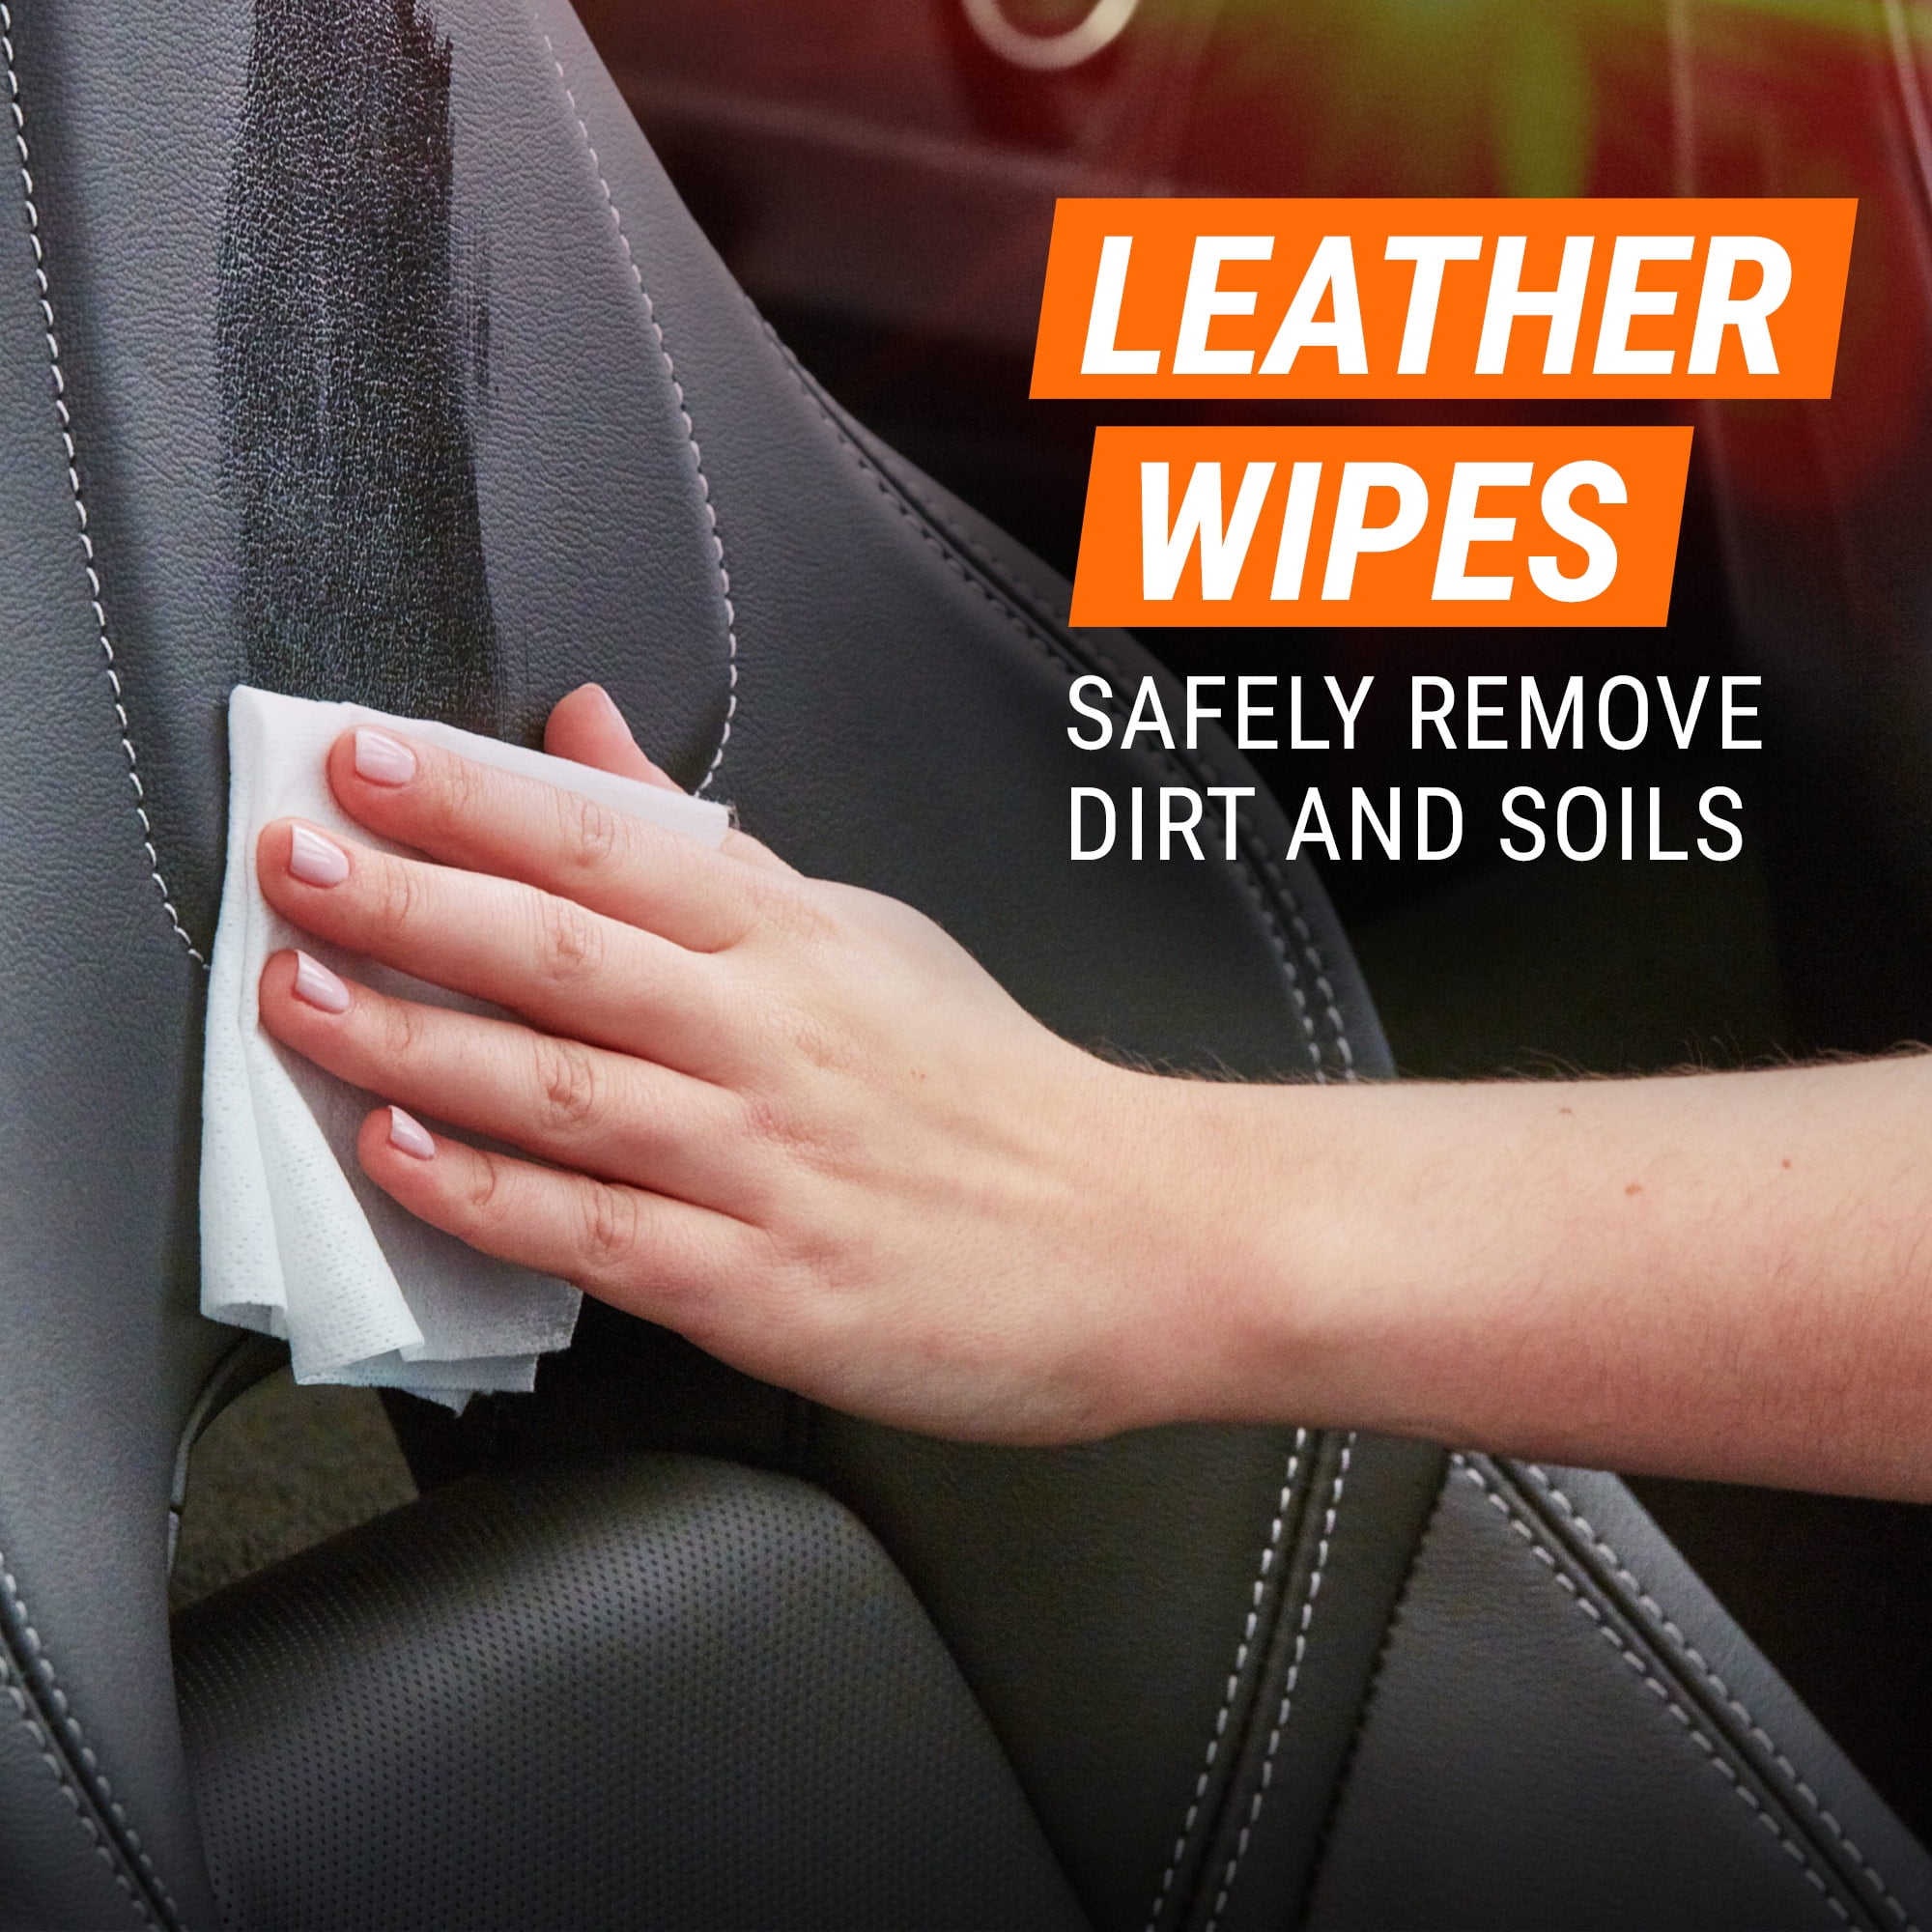 Armor All 18581C Leather Wipes, 8.44 in L, 3.31 in W, Mild, Effective to  Remove: Dirt, Soil, 30-Wipes #VORG7677131, 18581C